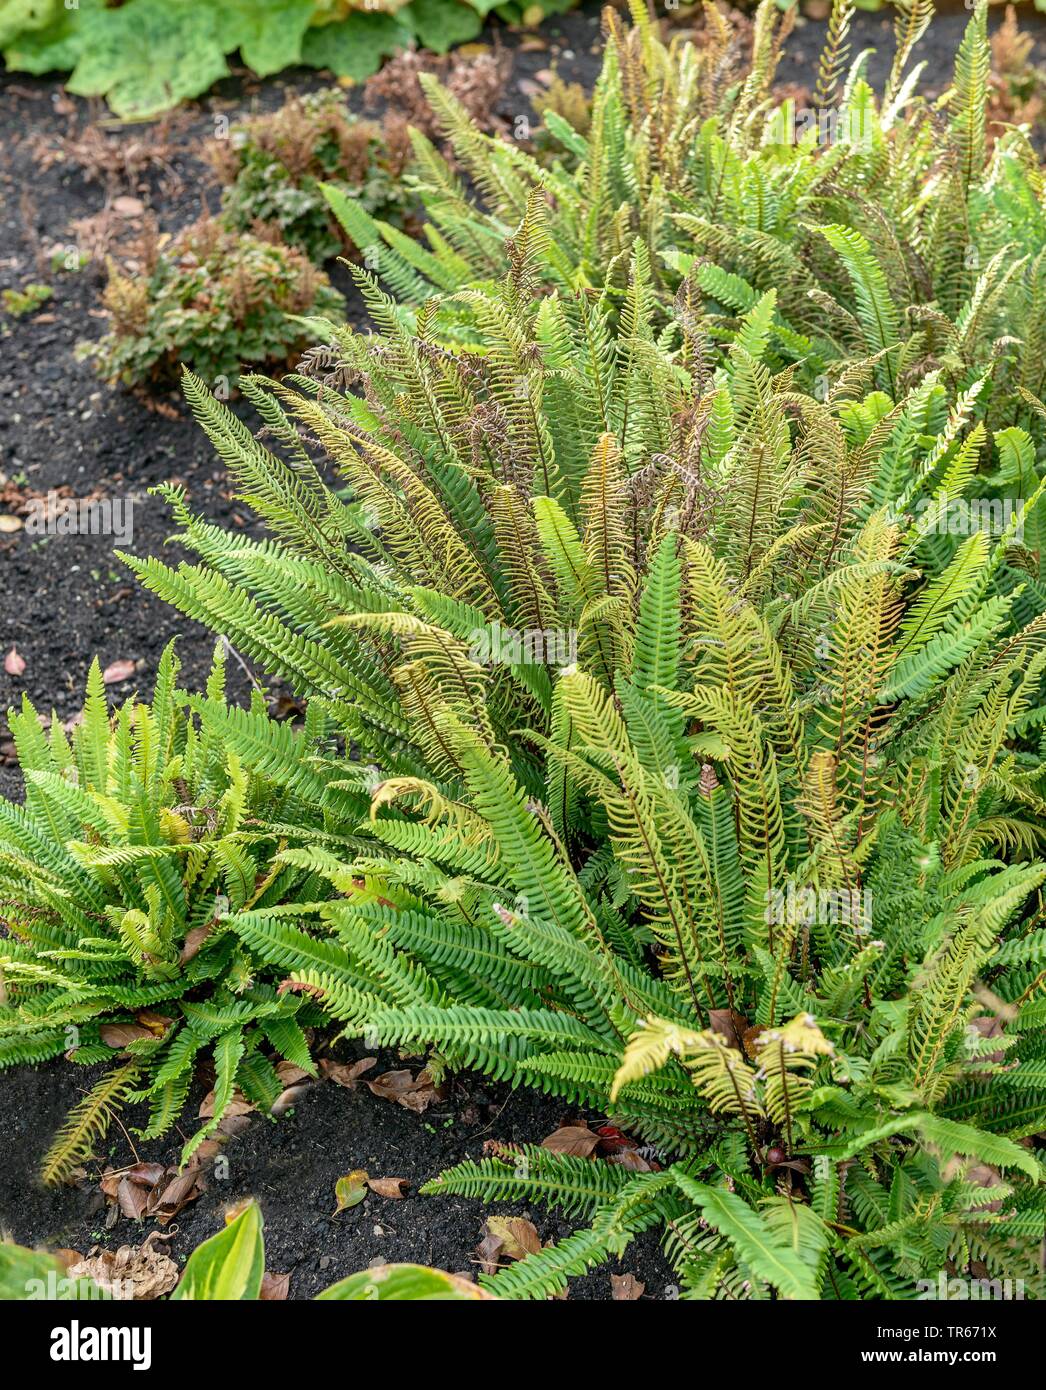 hard-fern (Blechnum spicant, Struthiopteris spicant), as ornamental plant Stock Photo